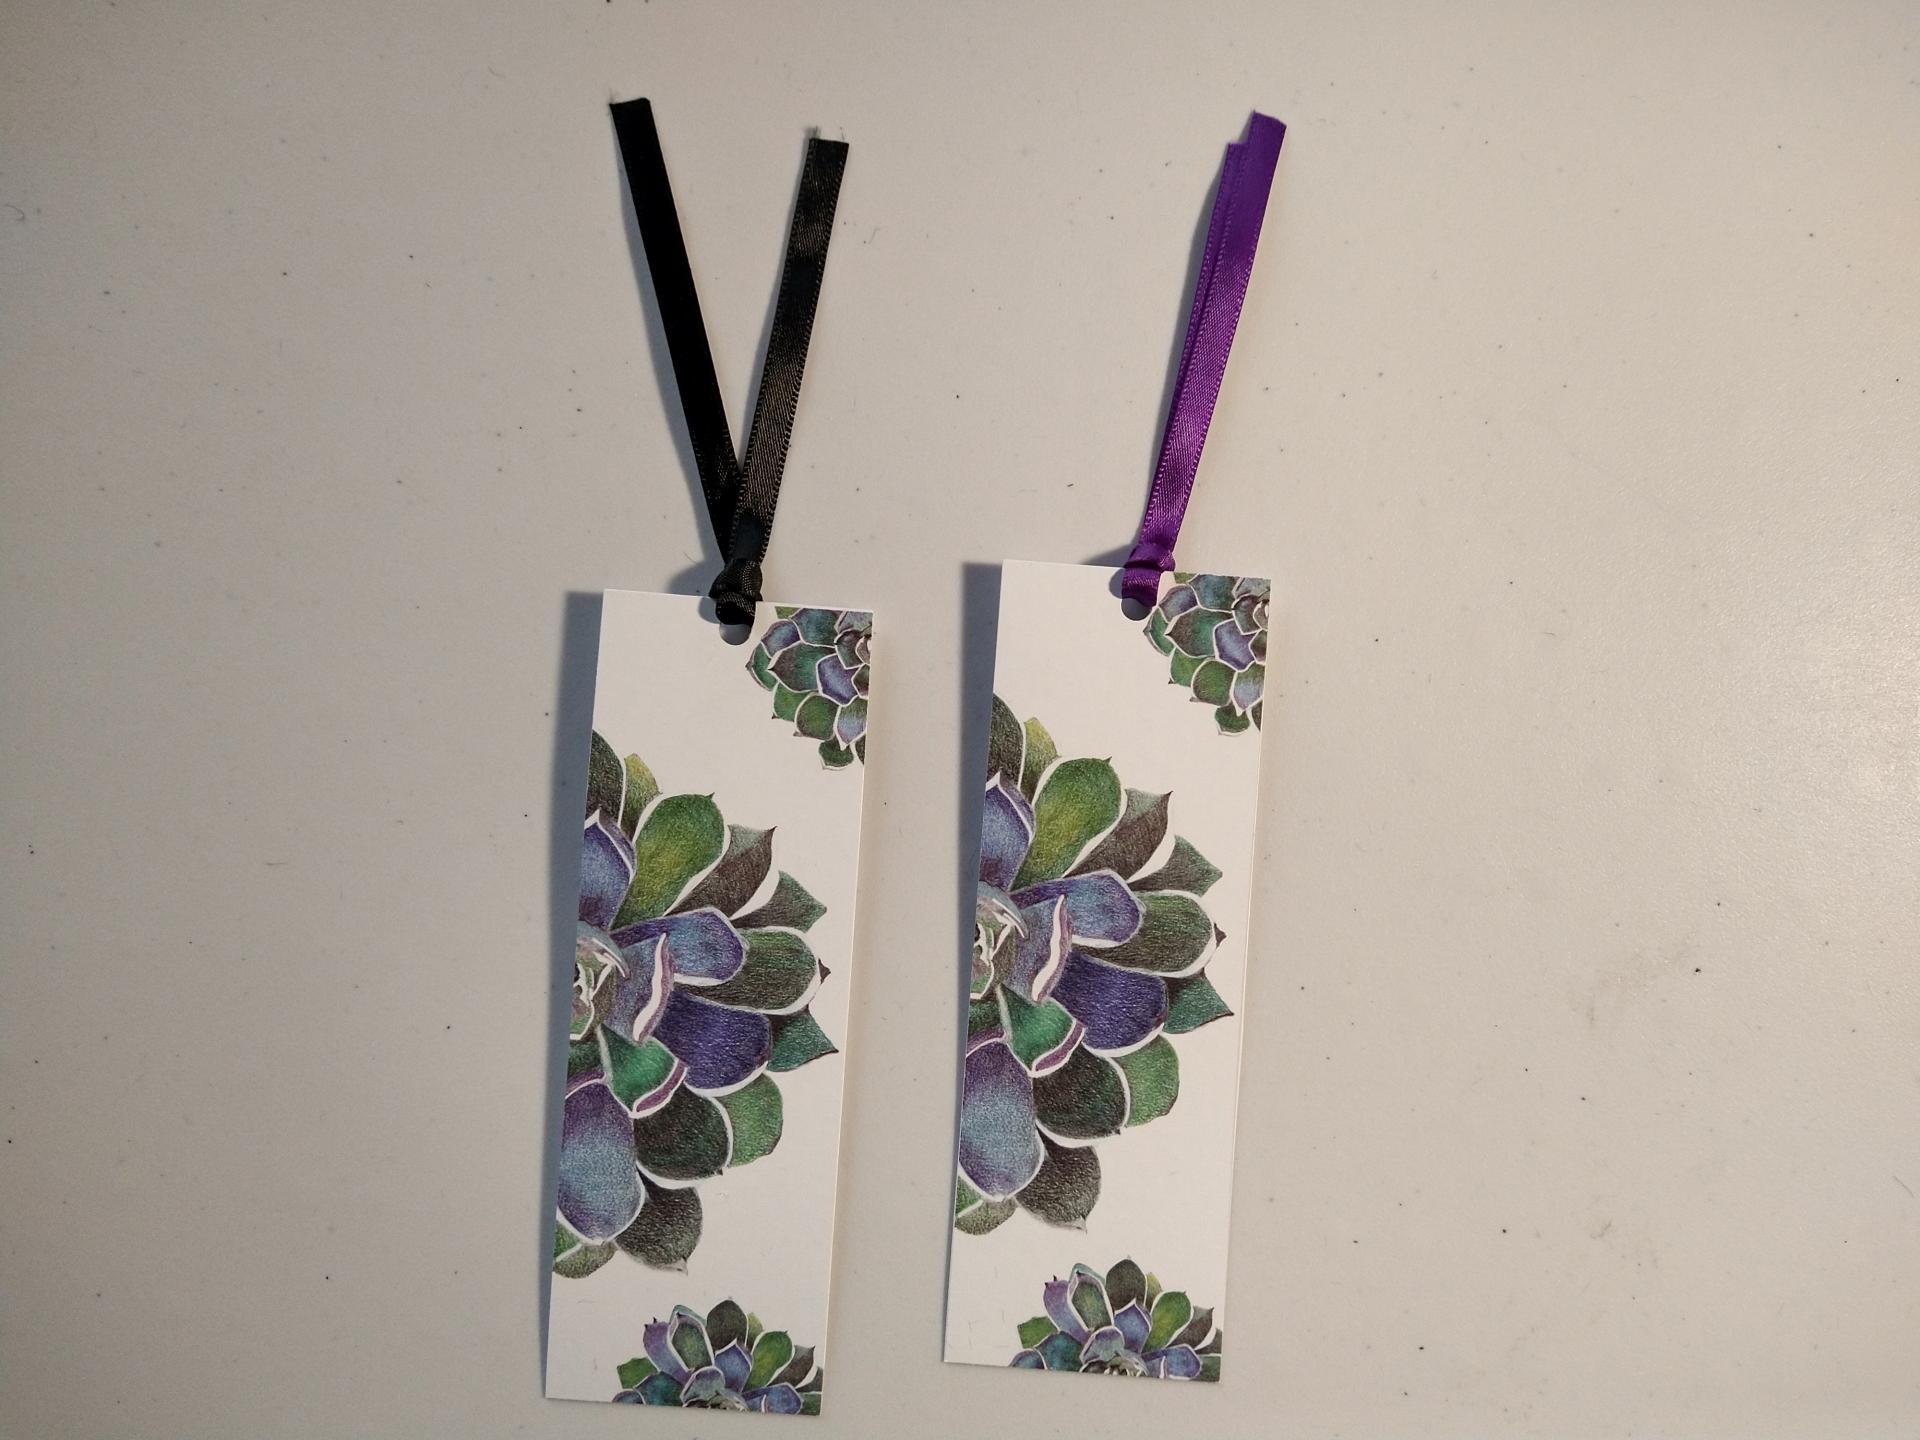 Pack of 6 Bookmarks, Choose between Gem Colored Succulent and/or Shark Bookmark